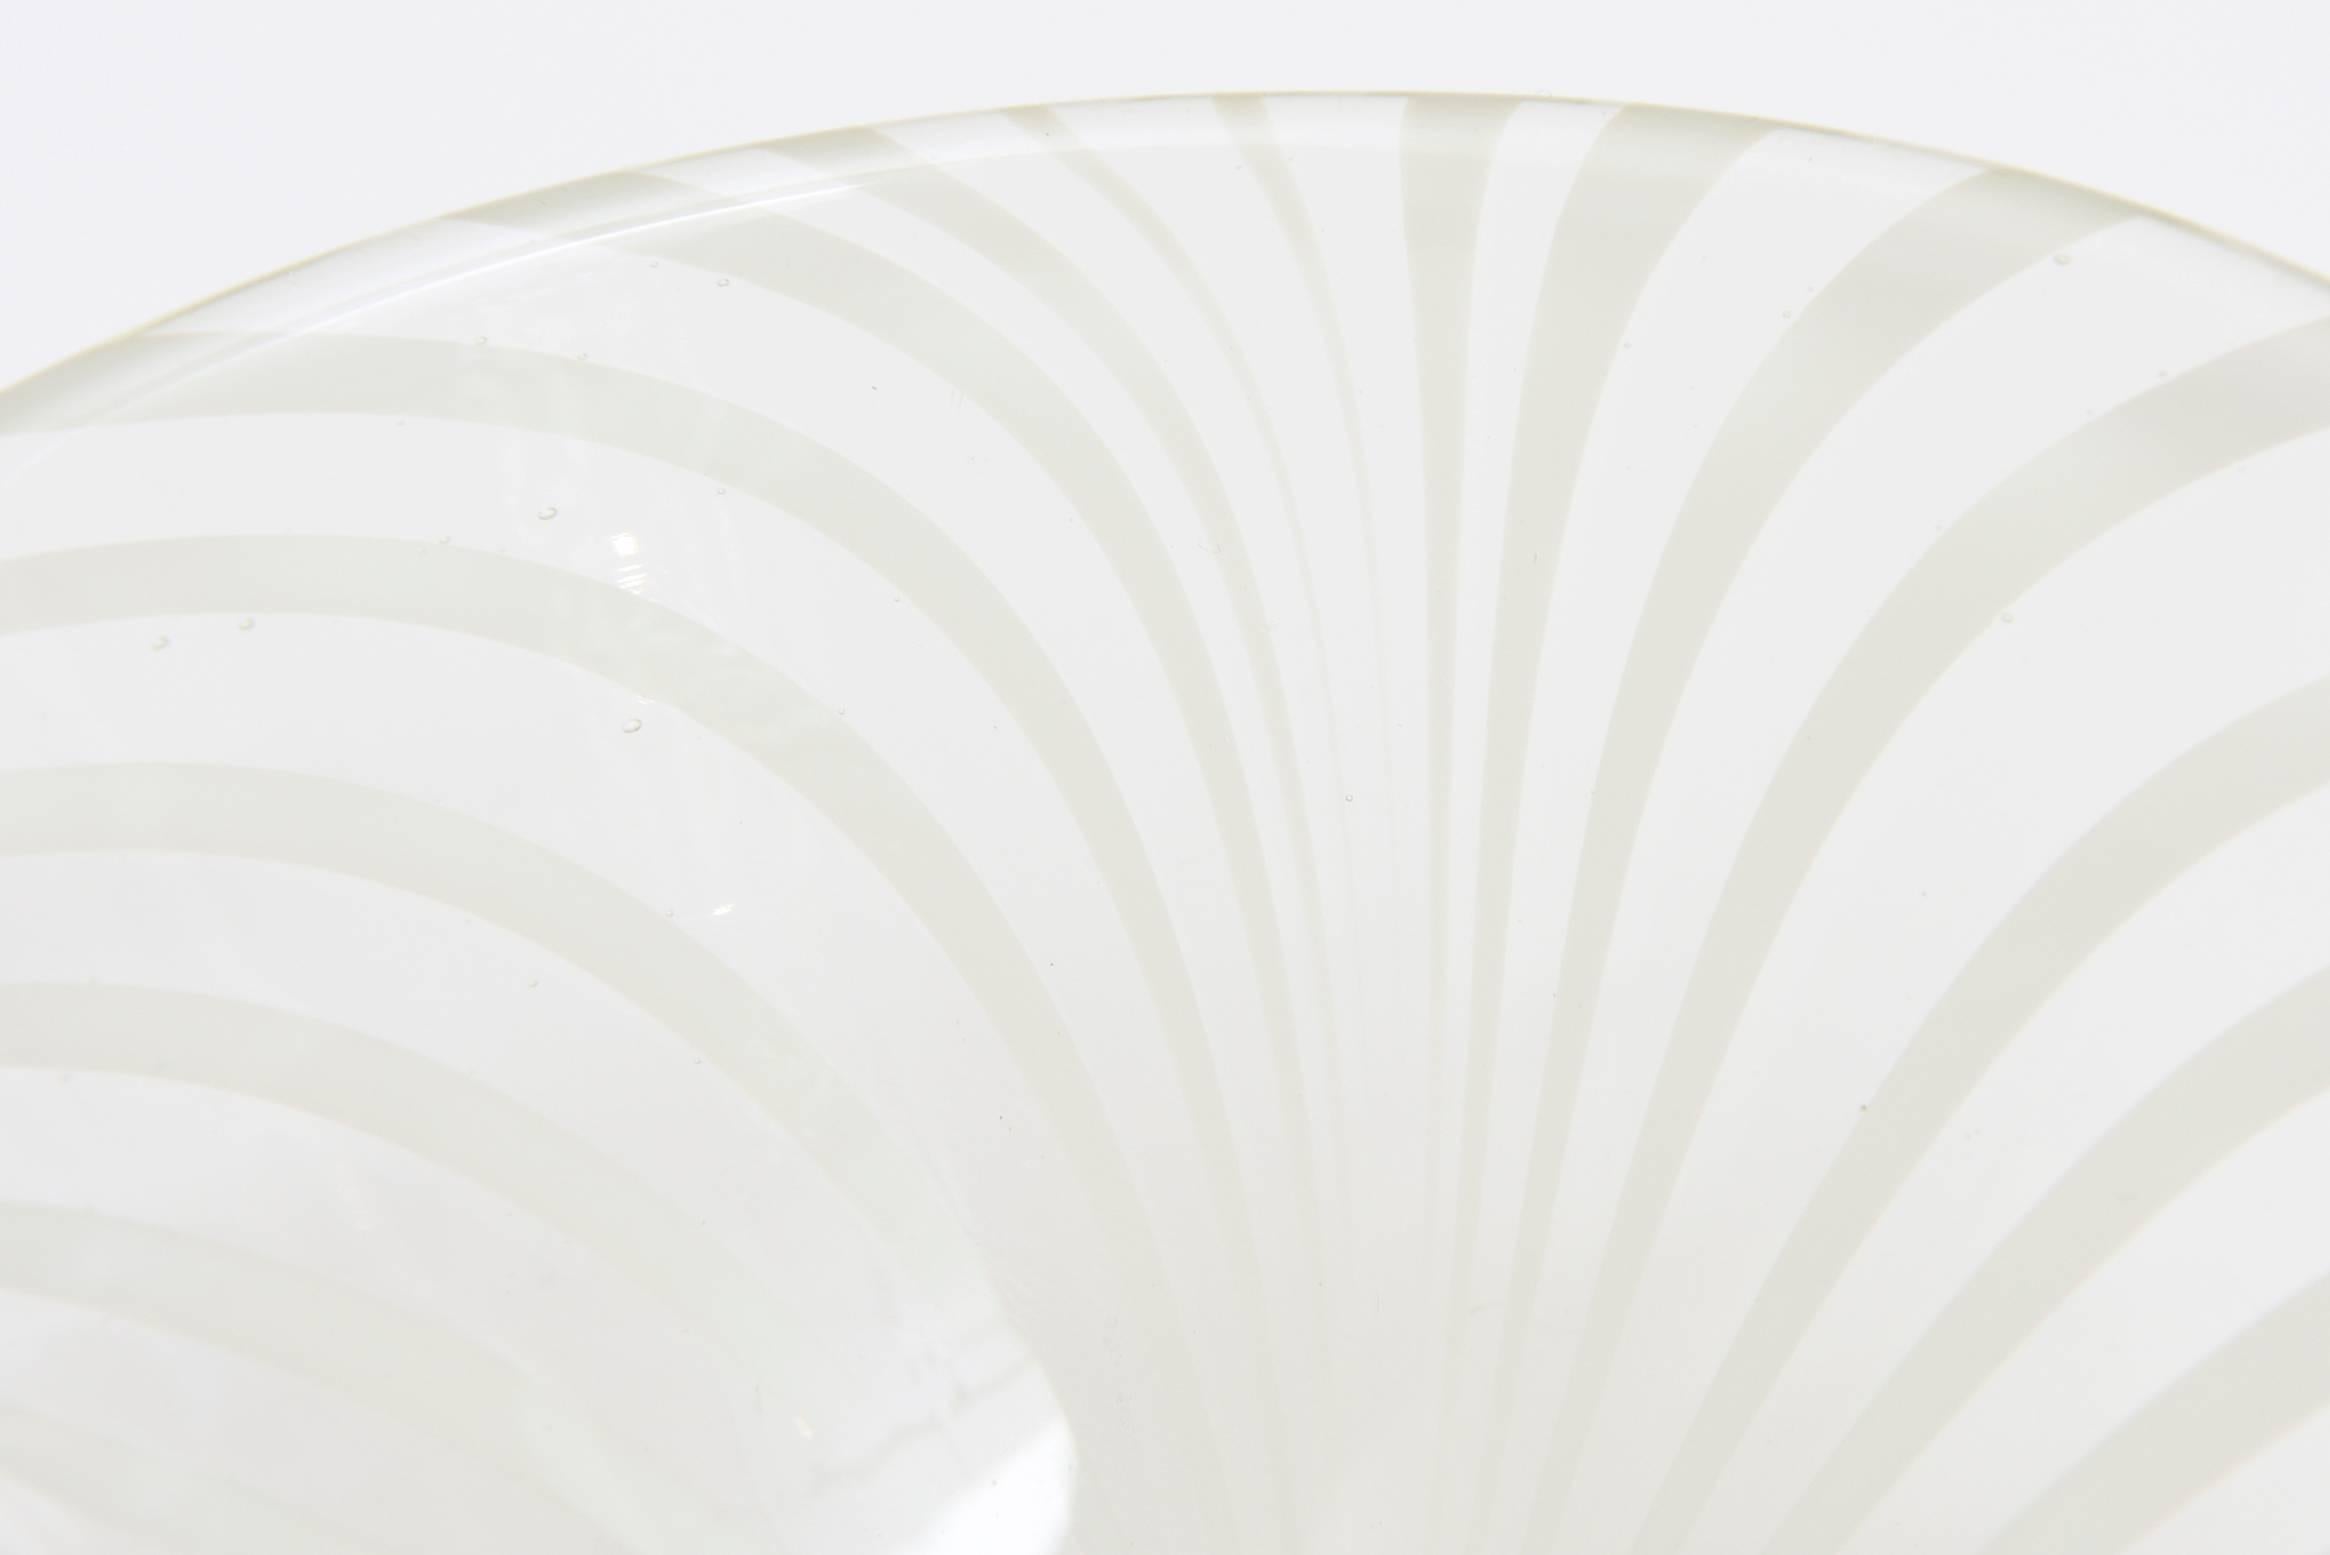 Sculptural Optical Swirled Swedish Glass Bowl In Good Condition For Sale In North Miami, FL